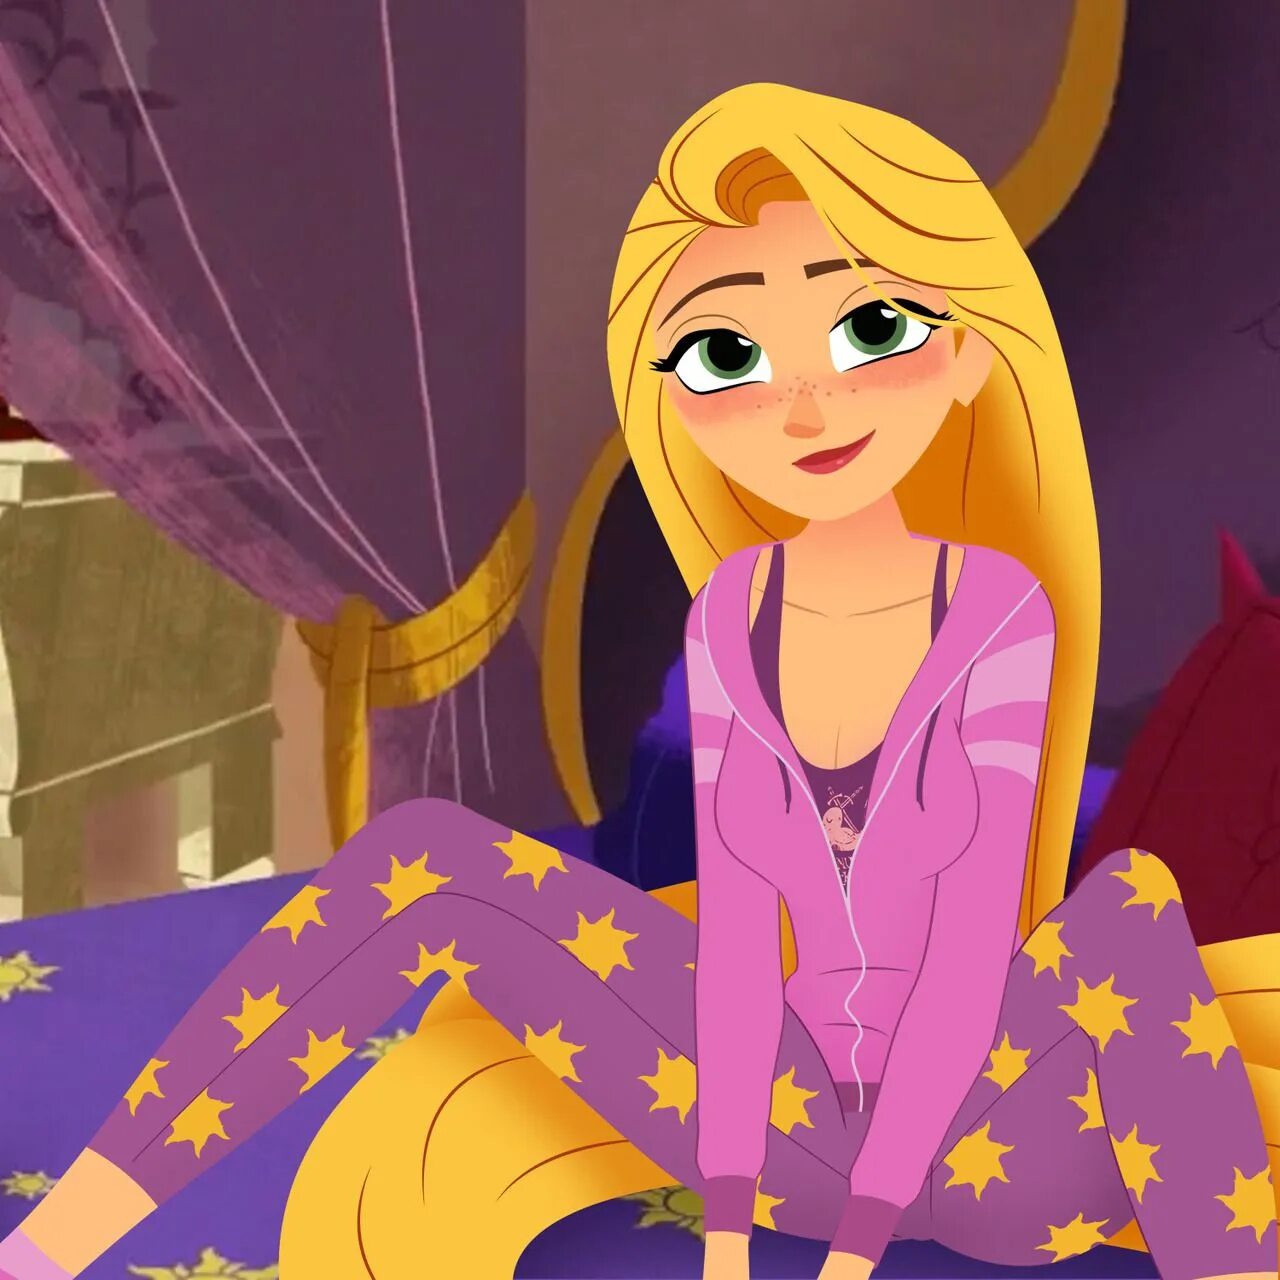 Tangled the series. Рапунцель. Рапунцель Танглед. Рапунцель Дисней.